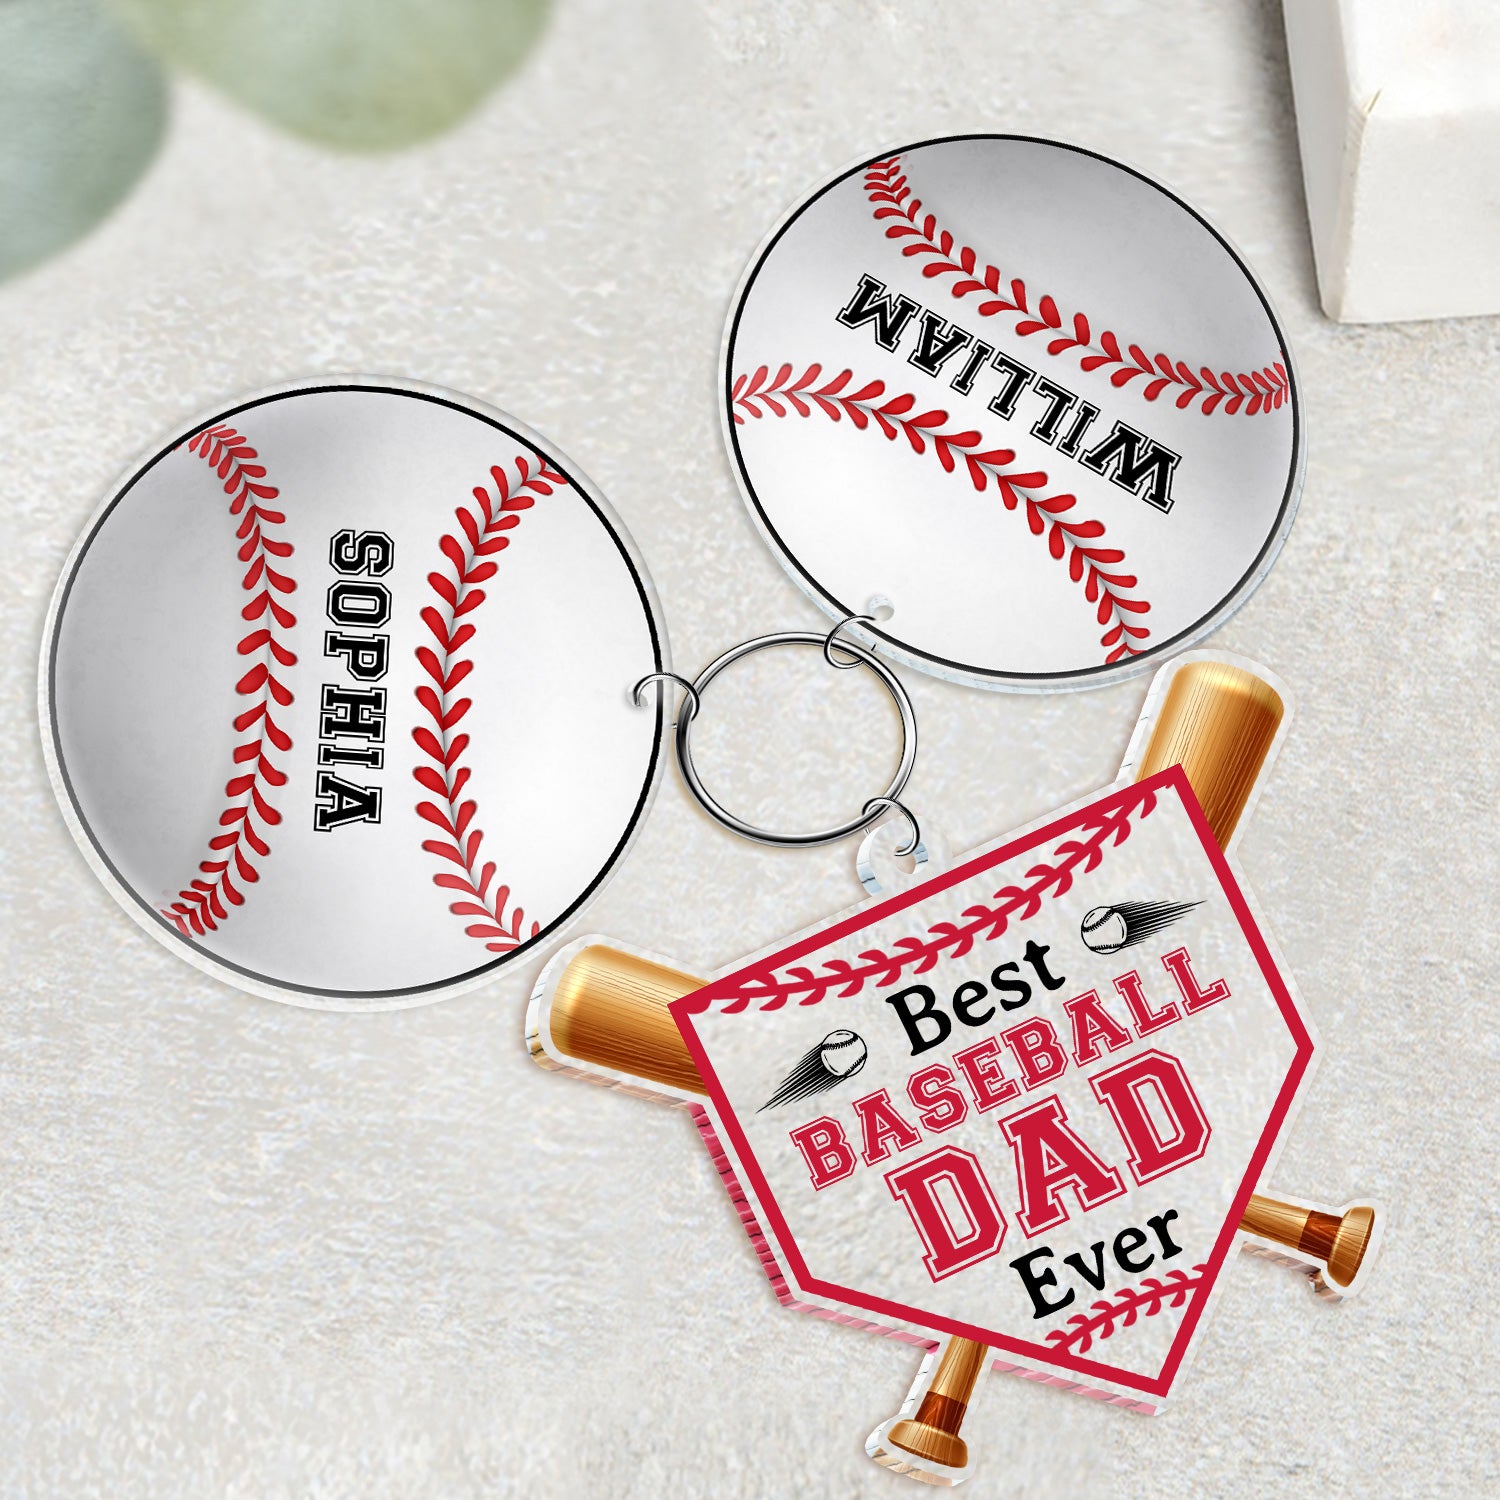 Best Baseball Dad Ever - Gift For Dad, Father, Baseball, Softball Fans - Personalized Acrylic Tag Keychain